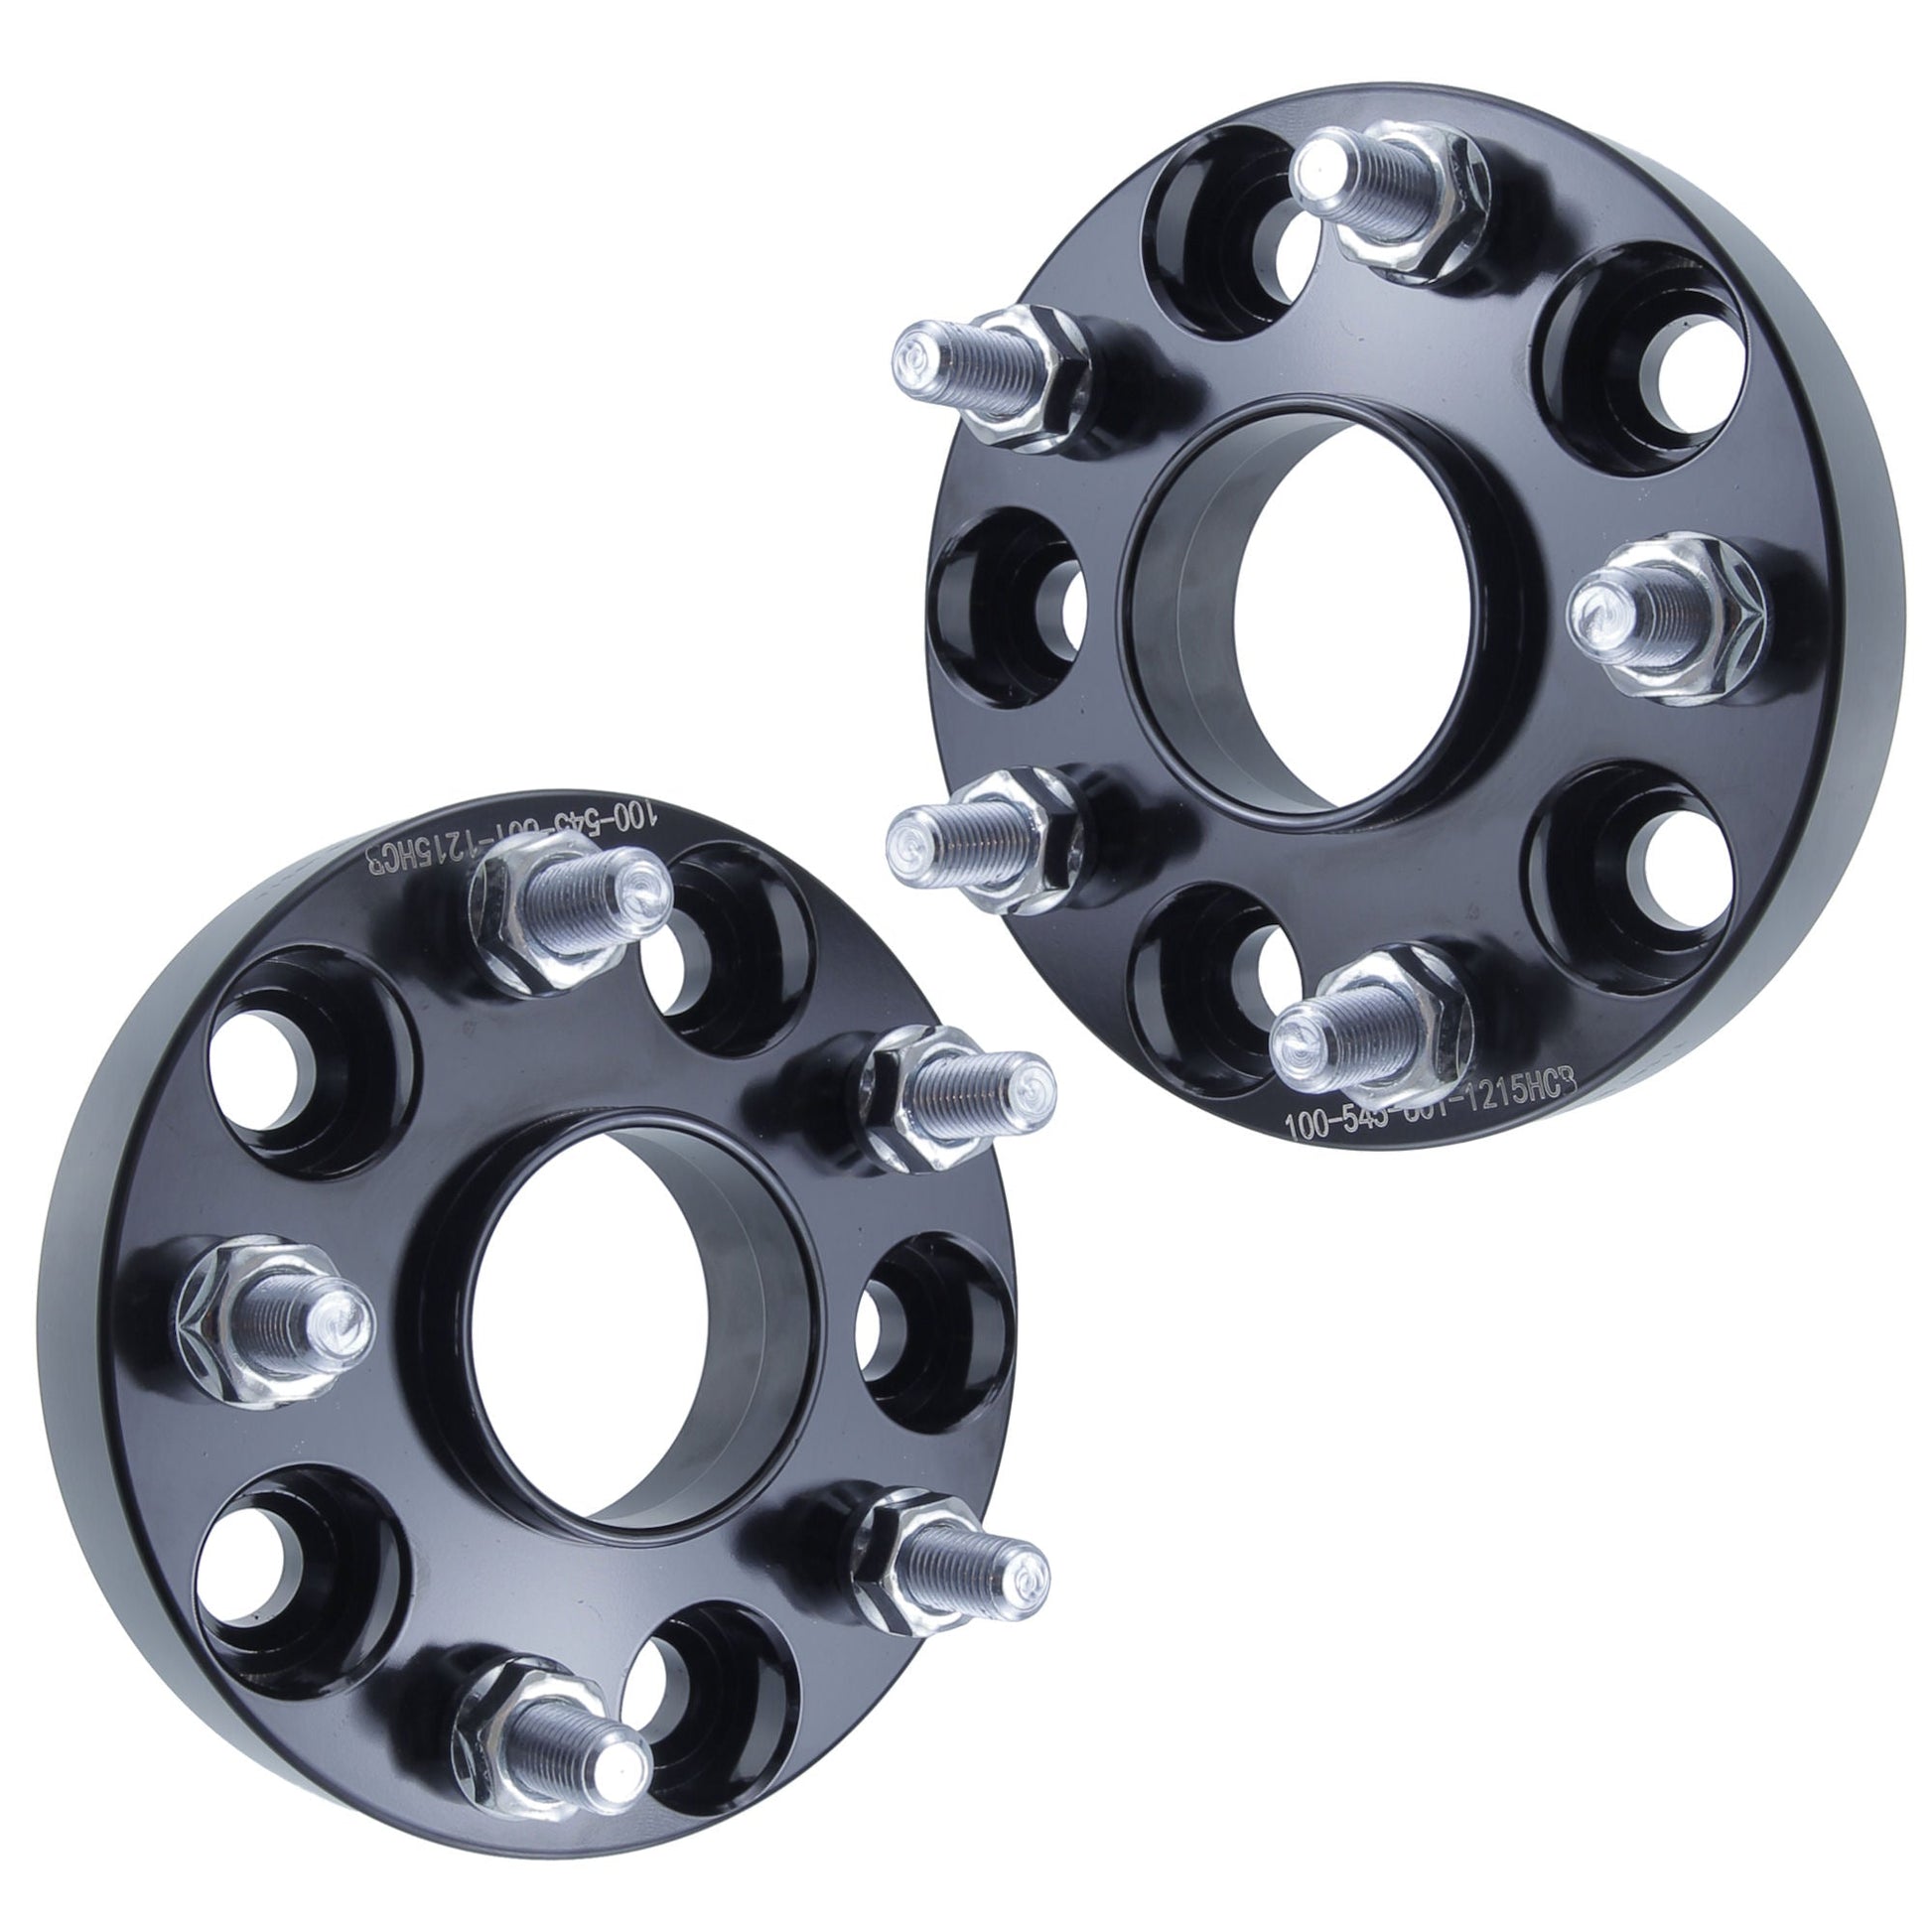 25mm (1") Titan Wheel Spacers for Toyota Camry MR2 Supra Lexus IS | 5x114.3 | 60.1 Hubcentric |12x1.5 Studs |  Set of 4 | Titan Wheel Accessories